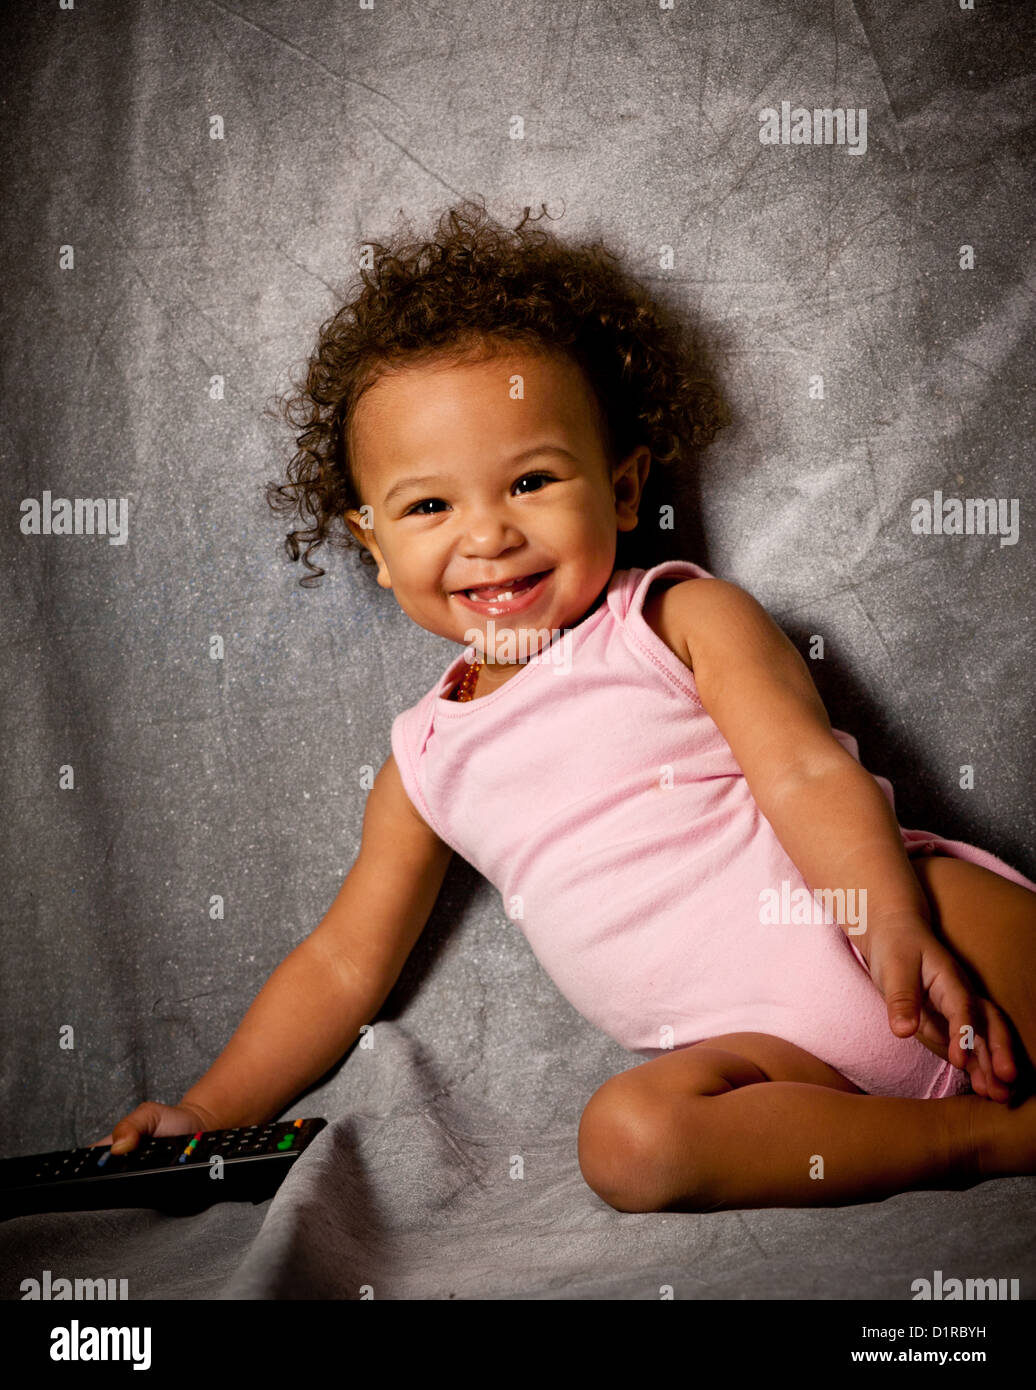 Studio Portrait Of A Cute Baby Girl 18 Months Mixed Race Stock